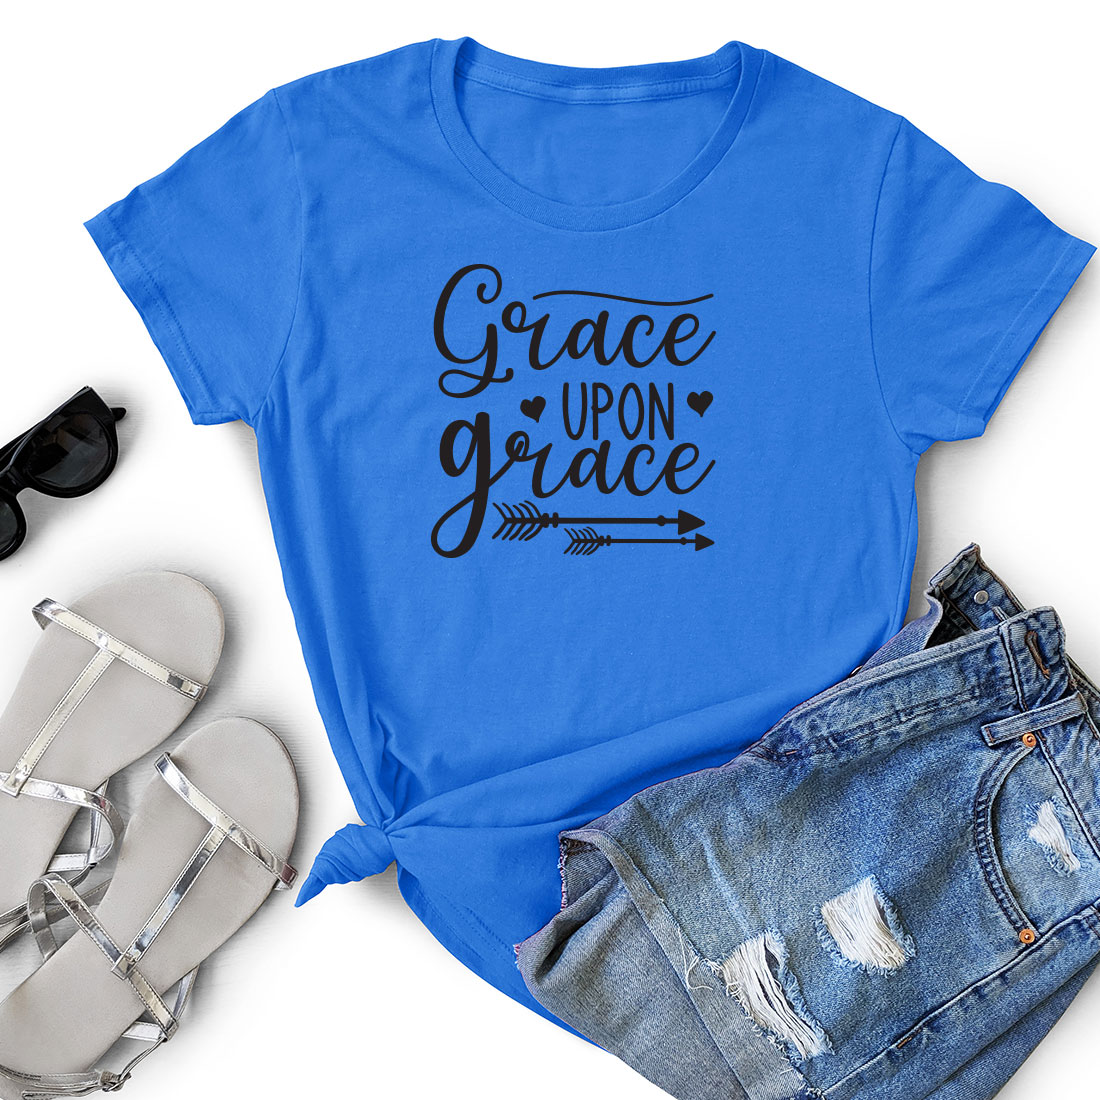 T - shirt that says grace upon grace next to a pair of shorts.